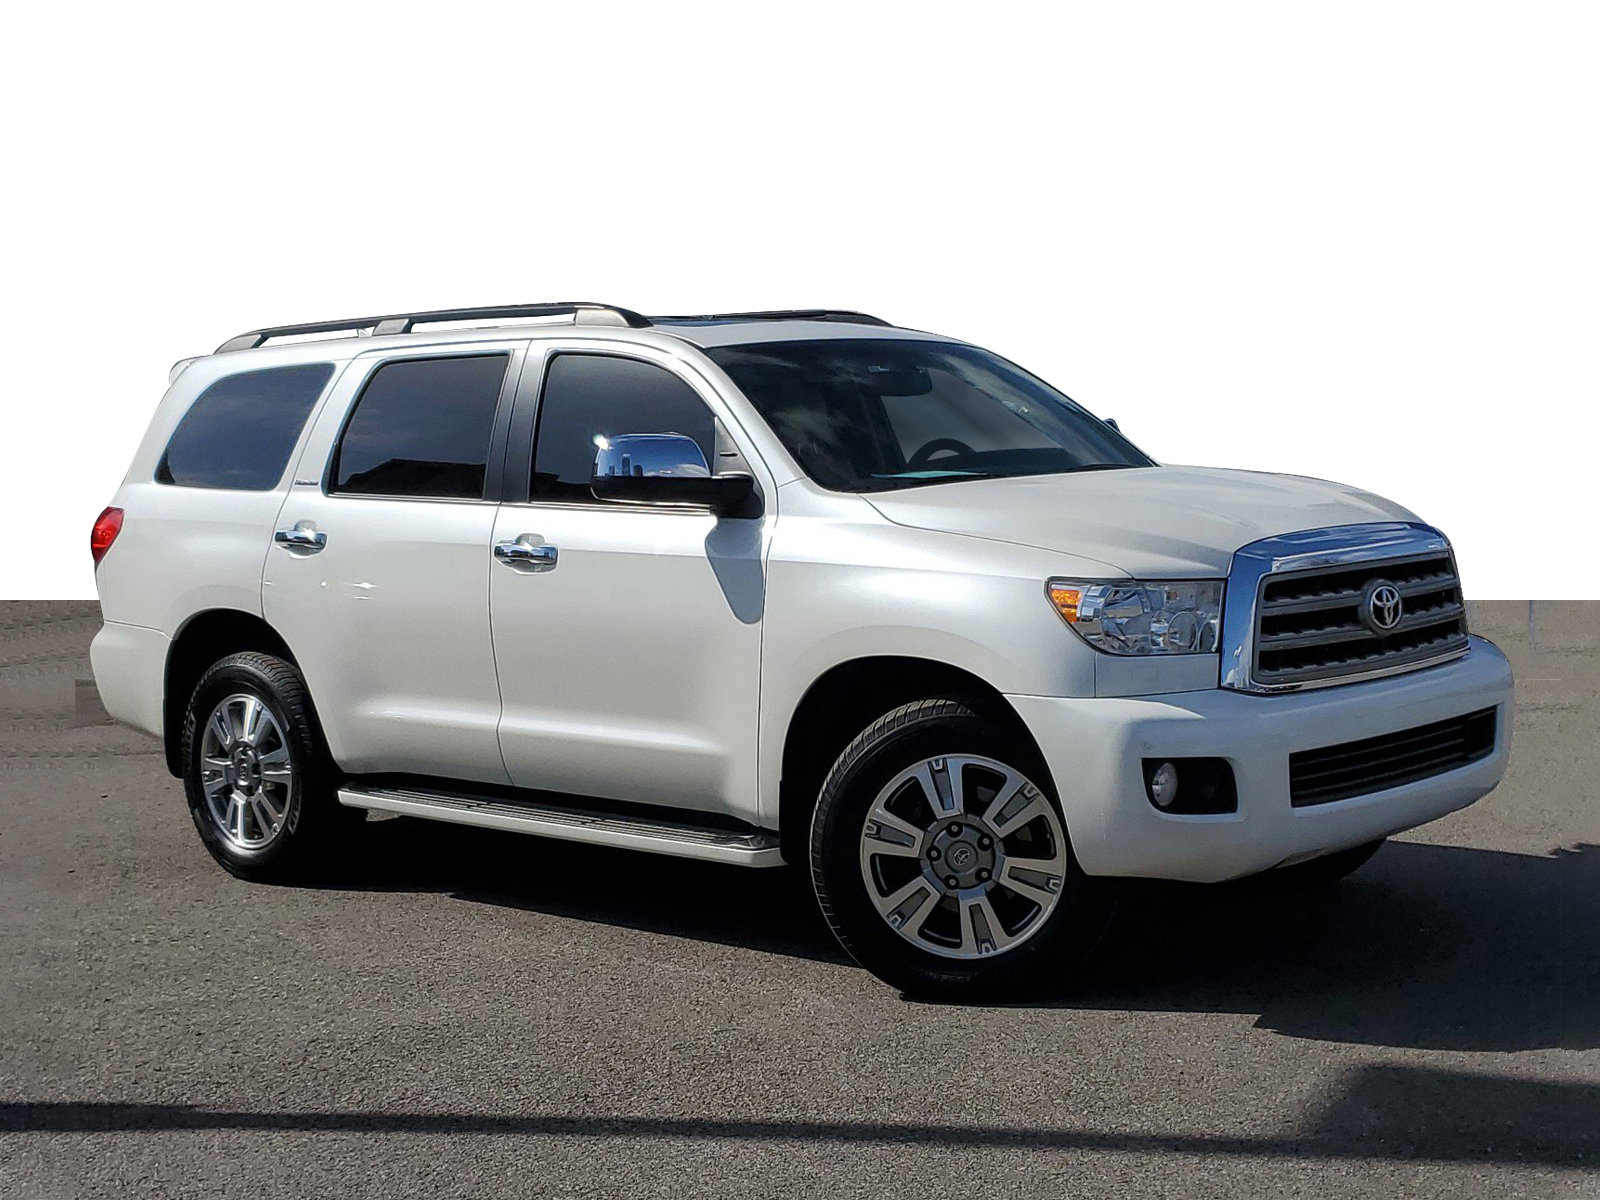 Pre-Owned 2014 Toyota Sequoia Platinum Sport Utility in Antioch #TES103090  | Beaman Buick GMC